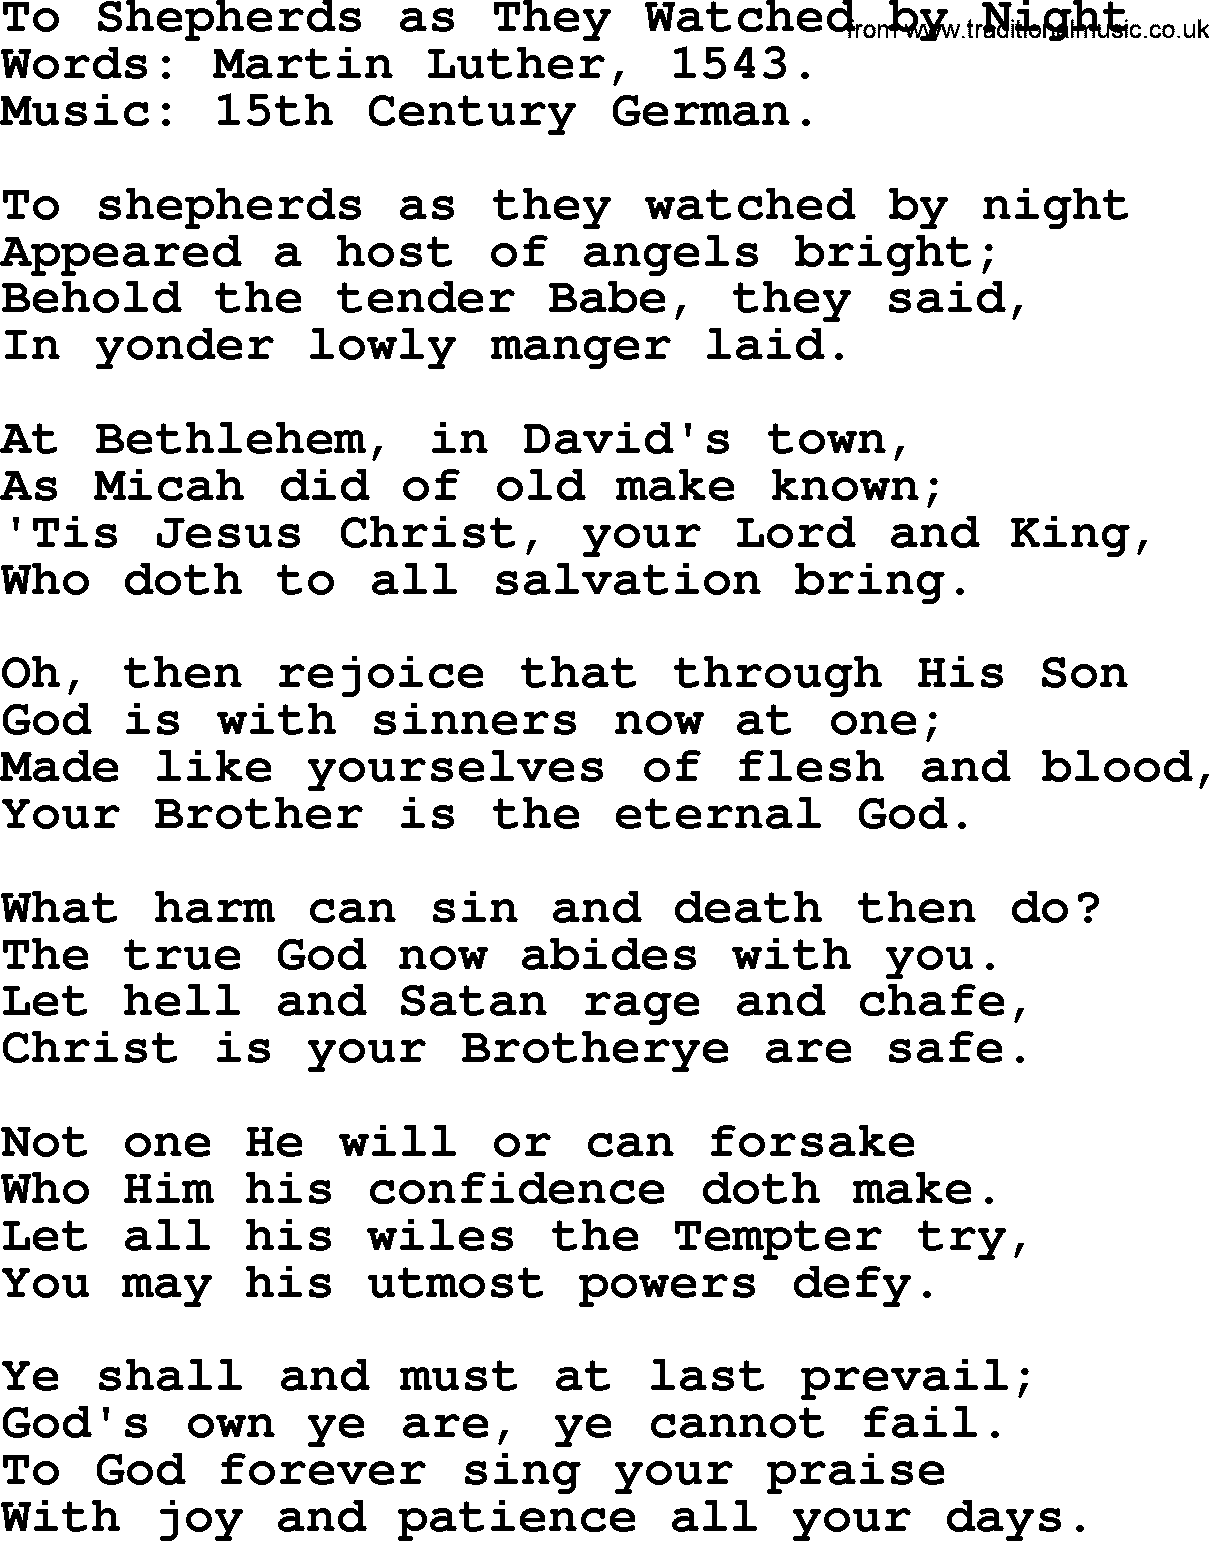 Christmas Hymns, Carols and Songs, title: To Shepherds As They Watched By Night, lyrics with PDF